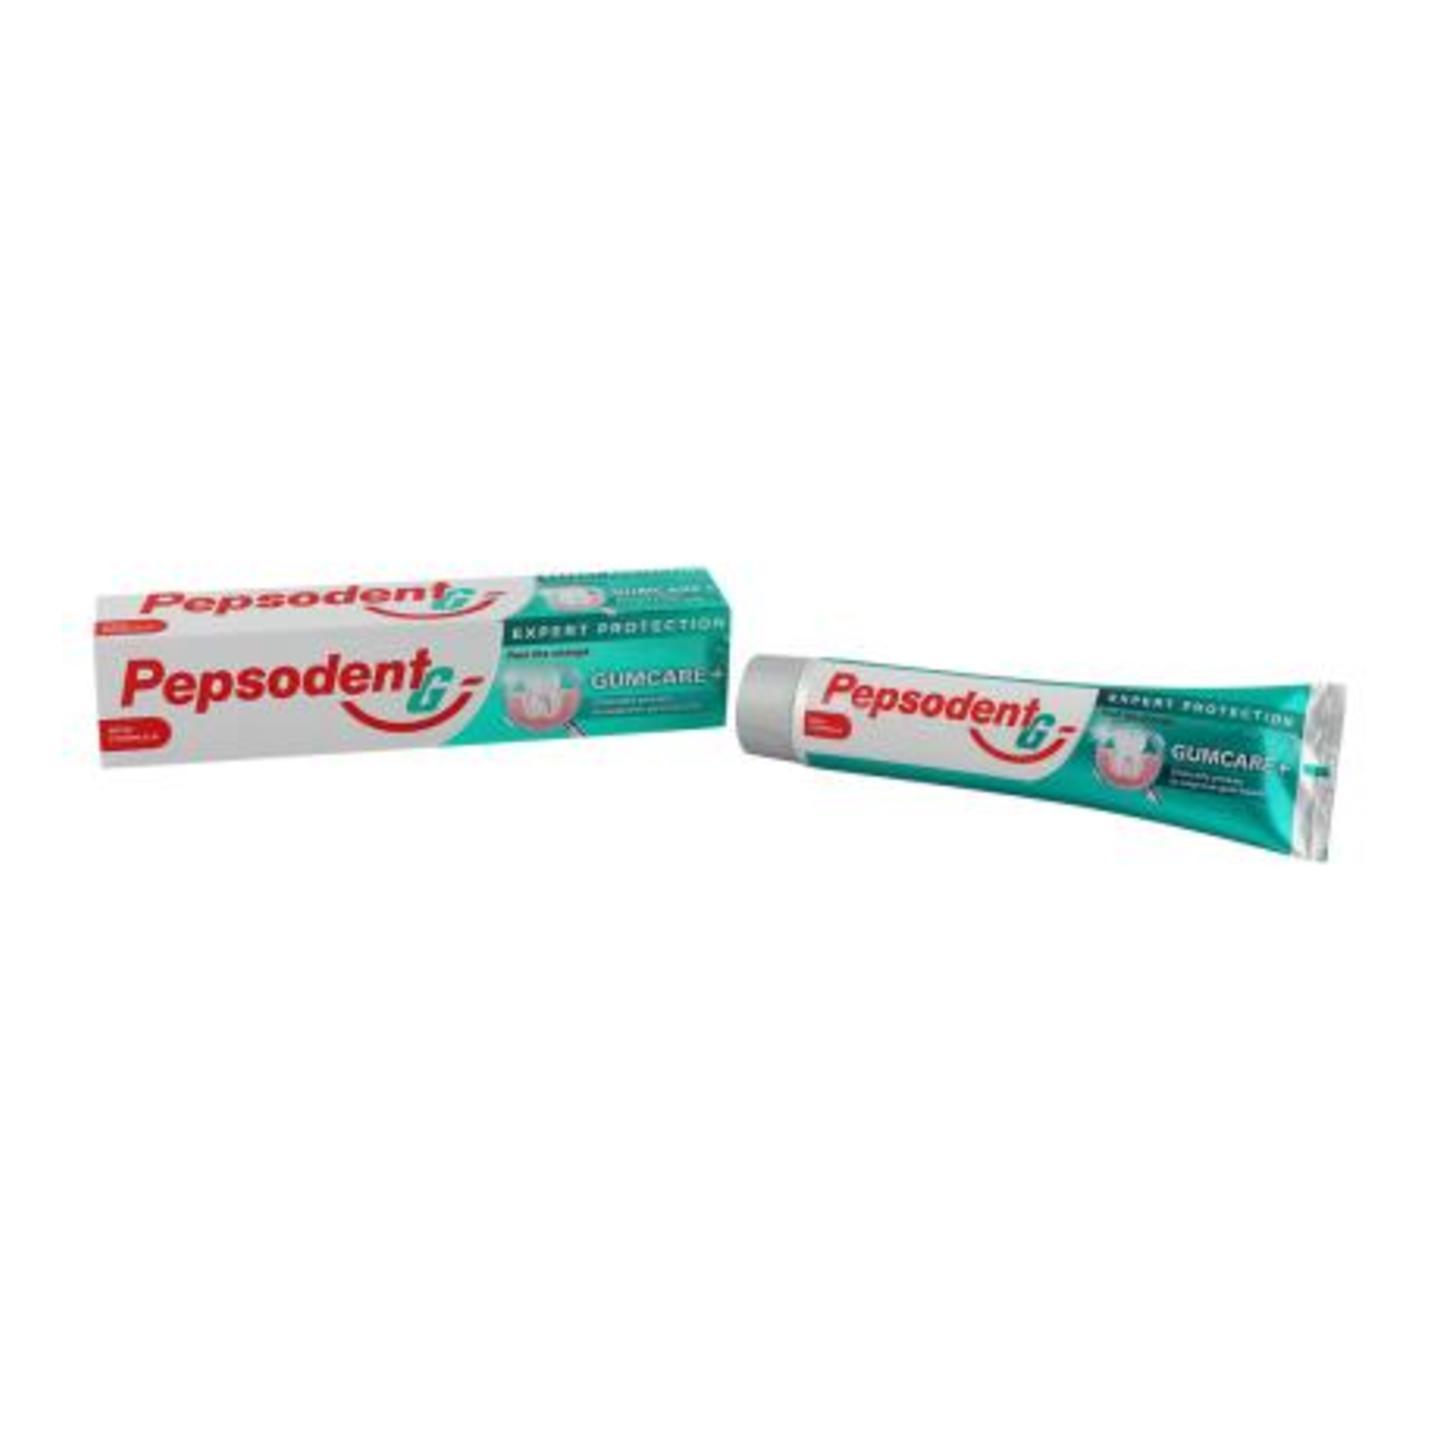 Pepsodent Expert Protection Gumcare+ Toothpaste 140 g PM//BM 0.15/18